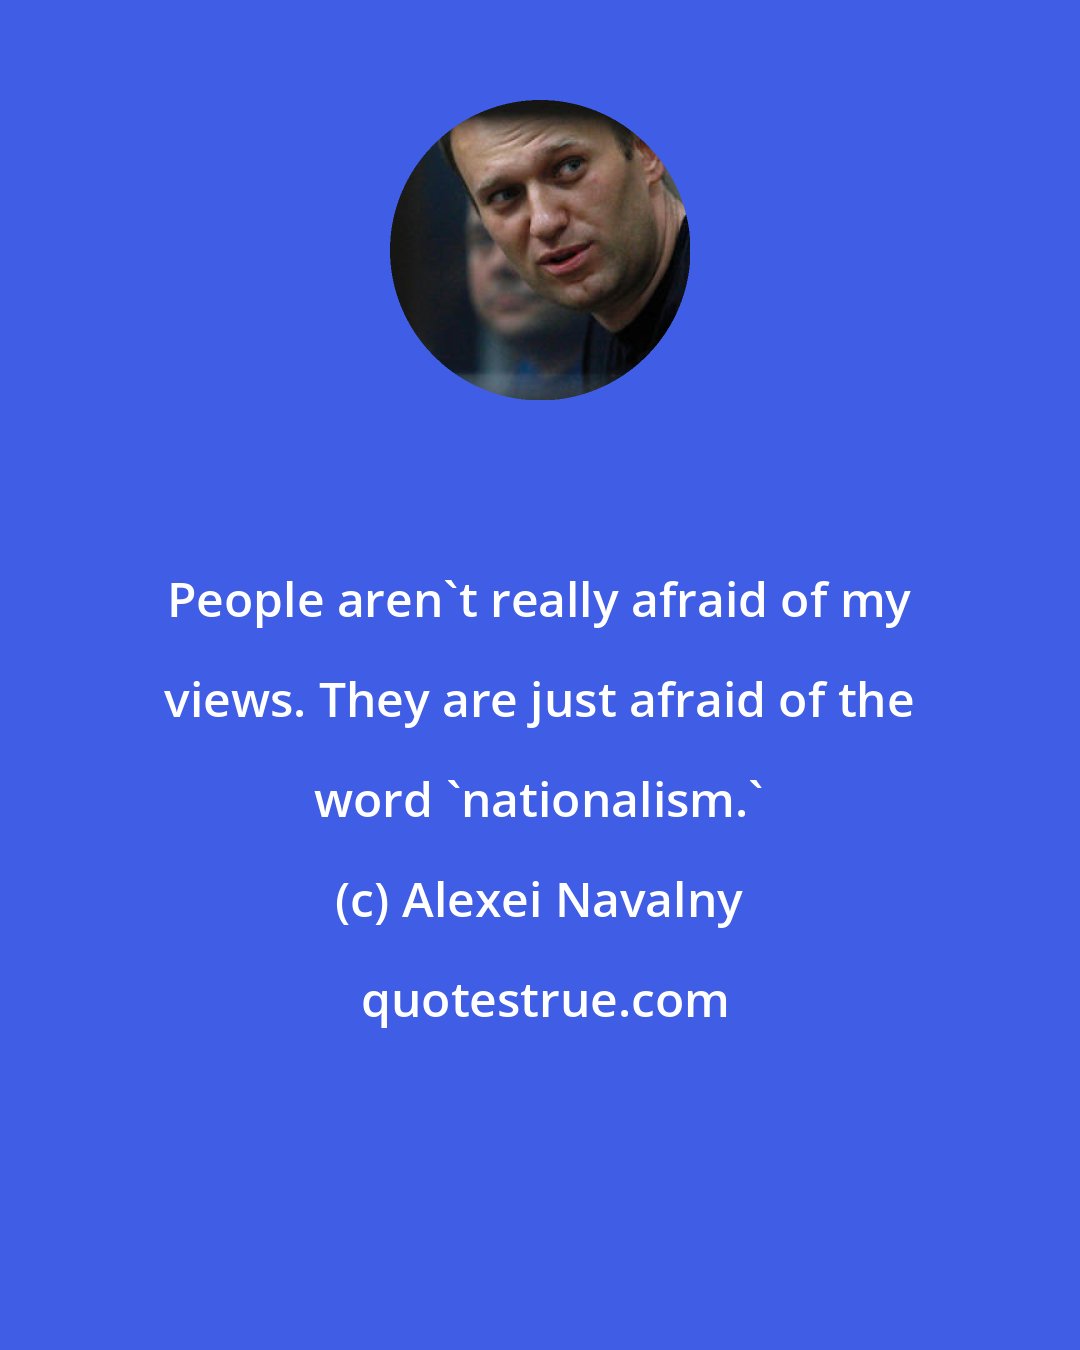 Alexei Navalny: People aren't really afraid of my views. They are just afraid of the word 'nationalism.'